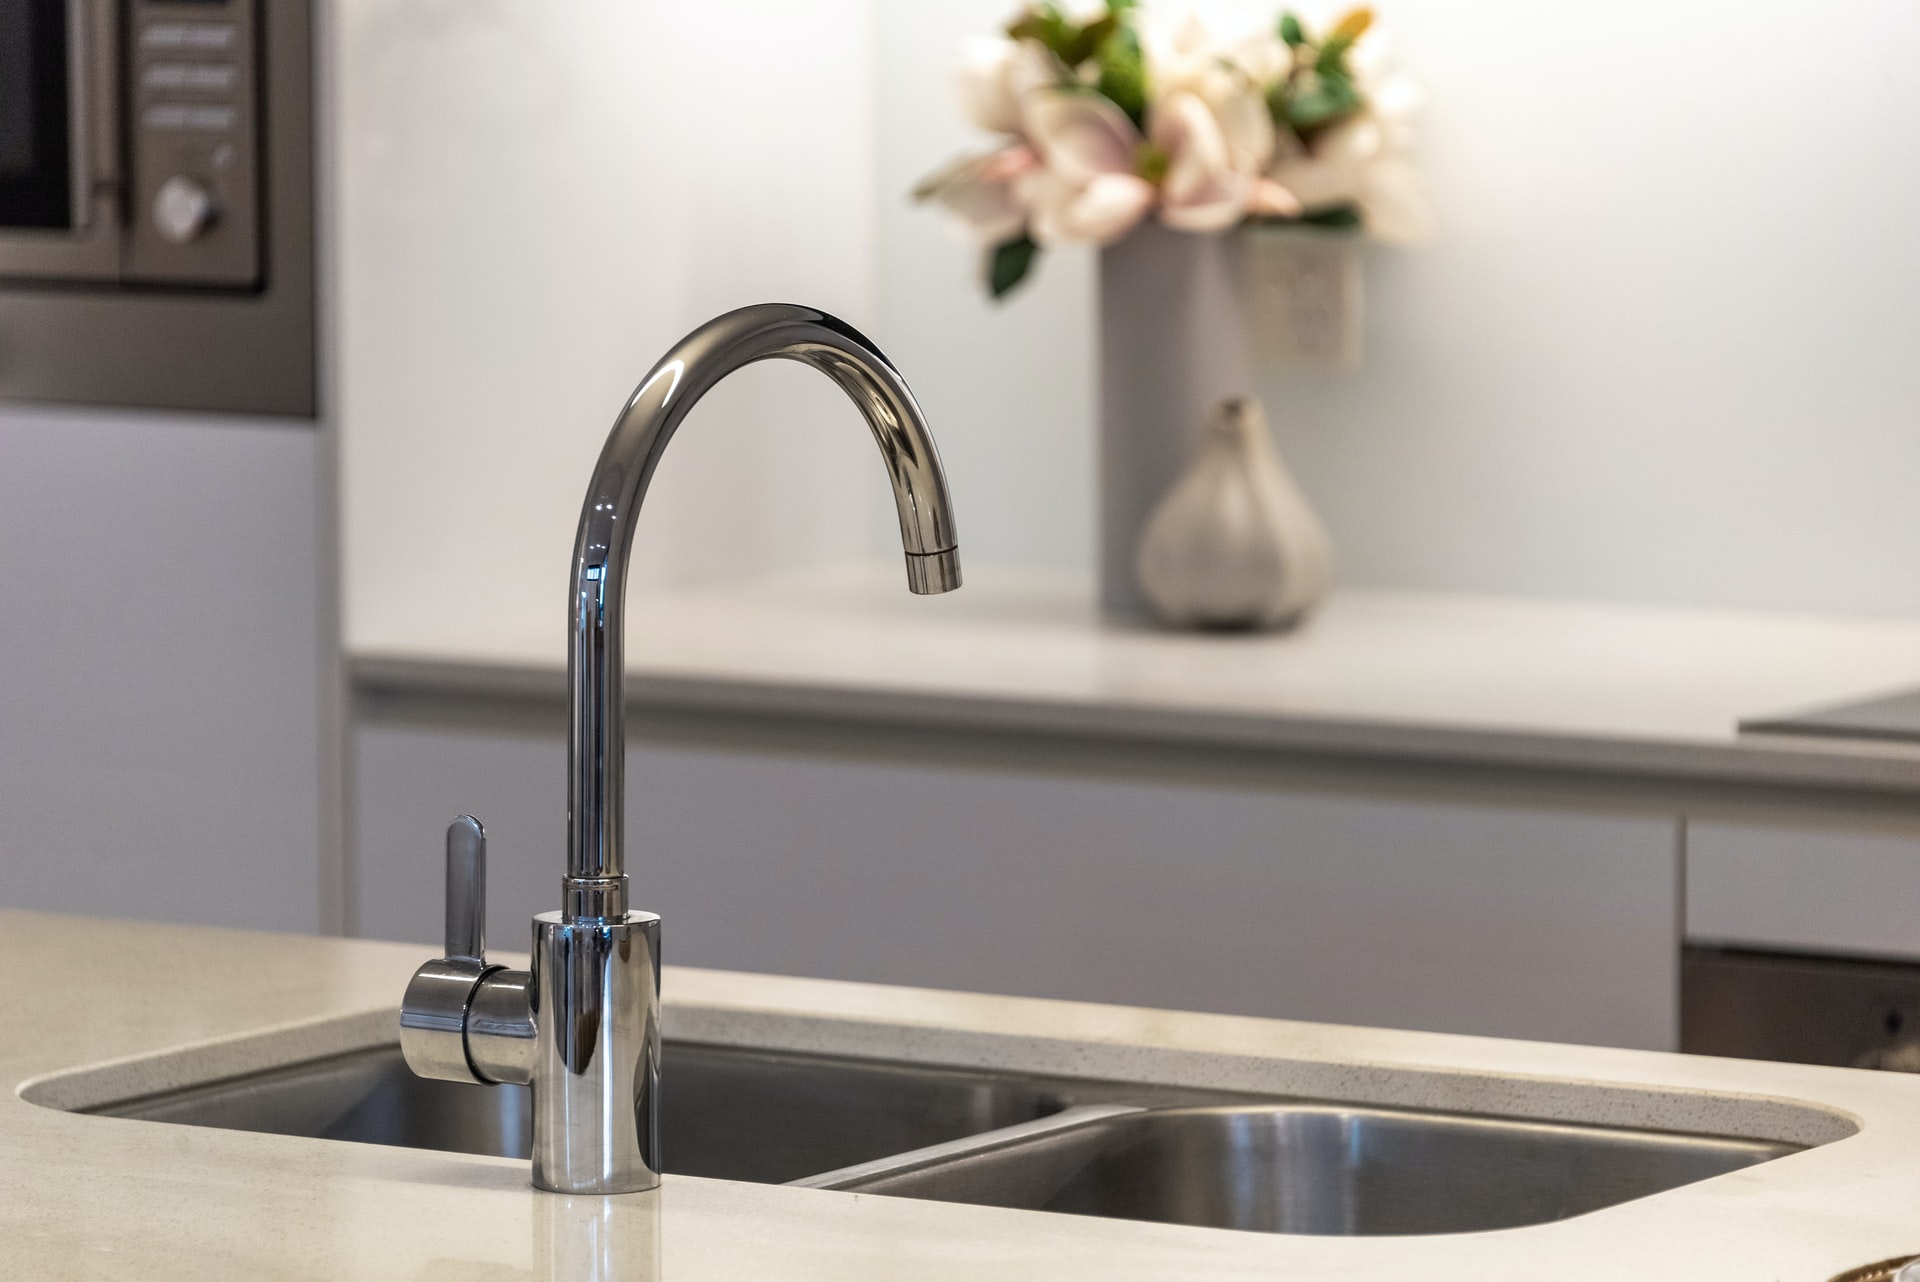 Choosing a New Kitchen Sink If You Are Kitchen Remodeling